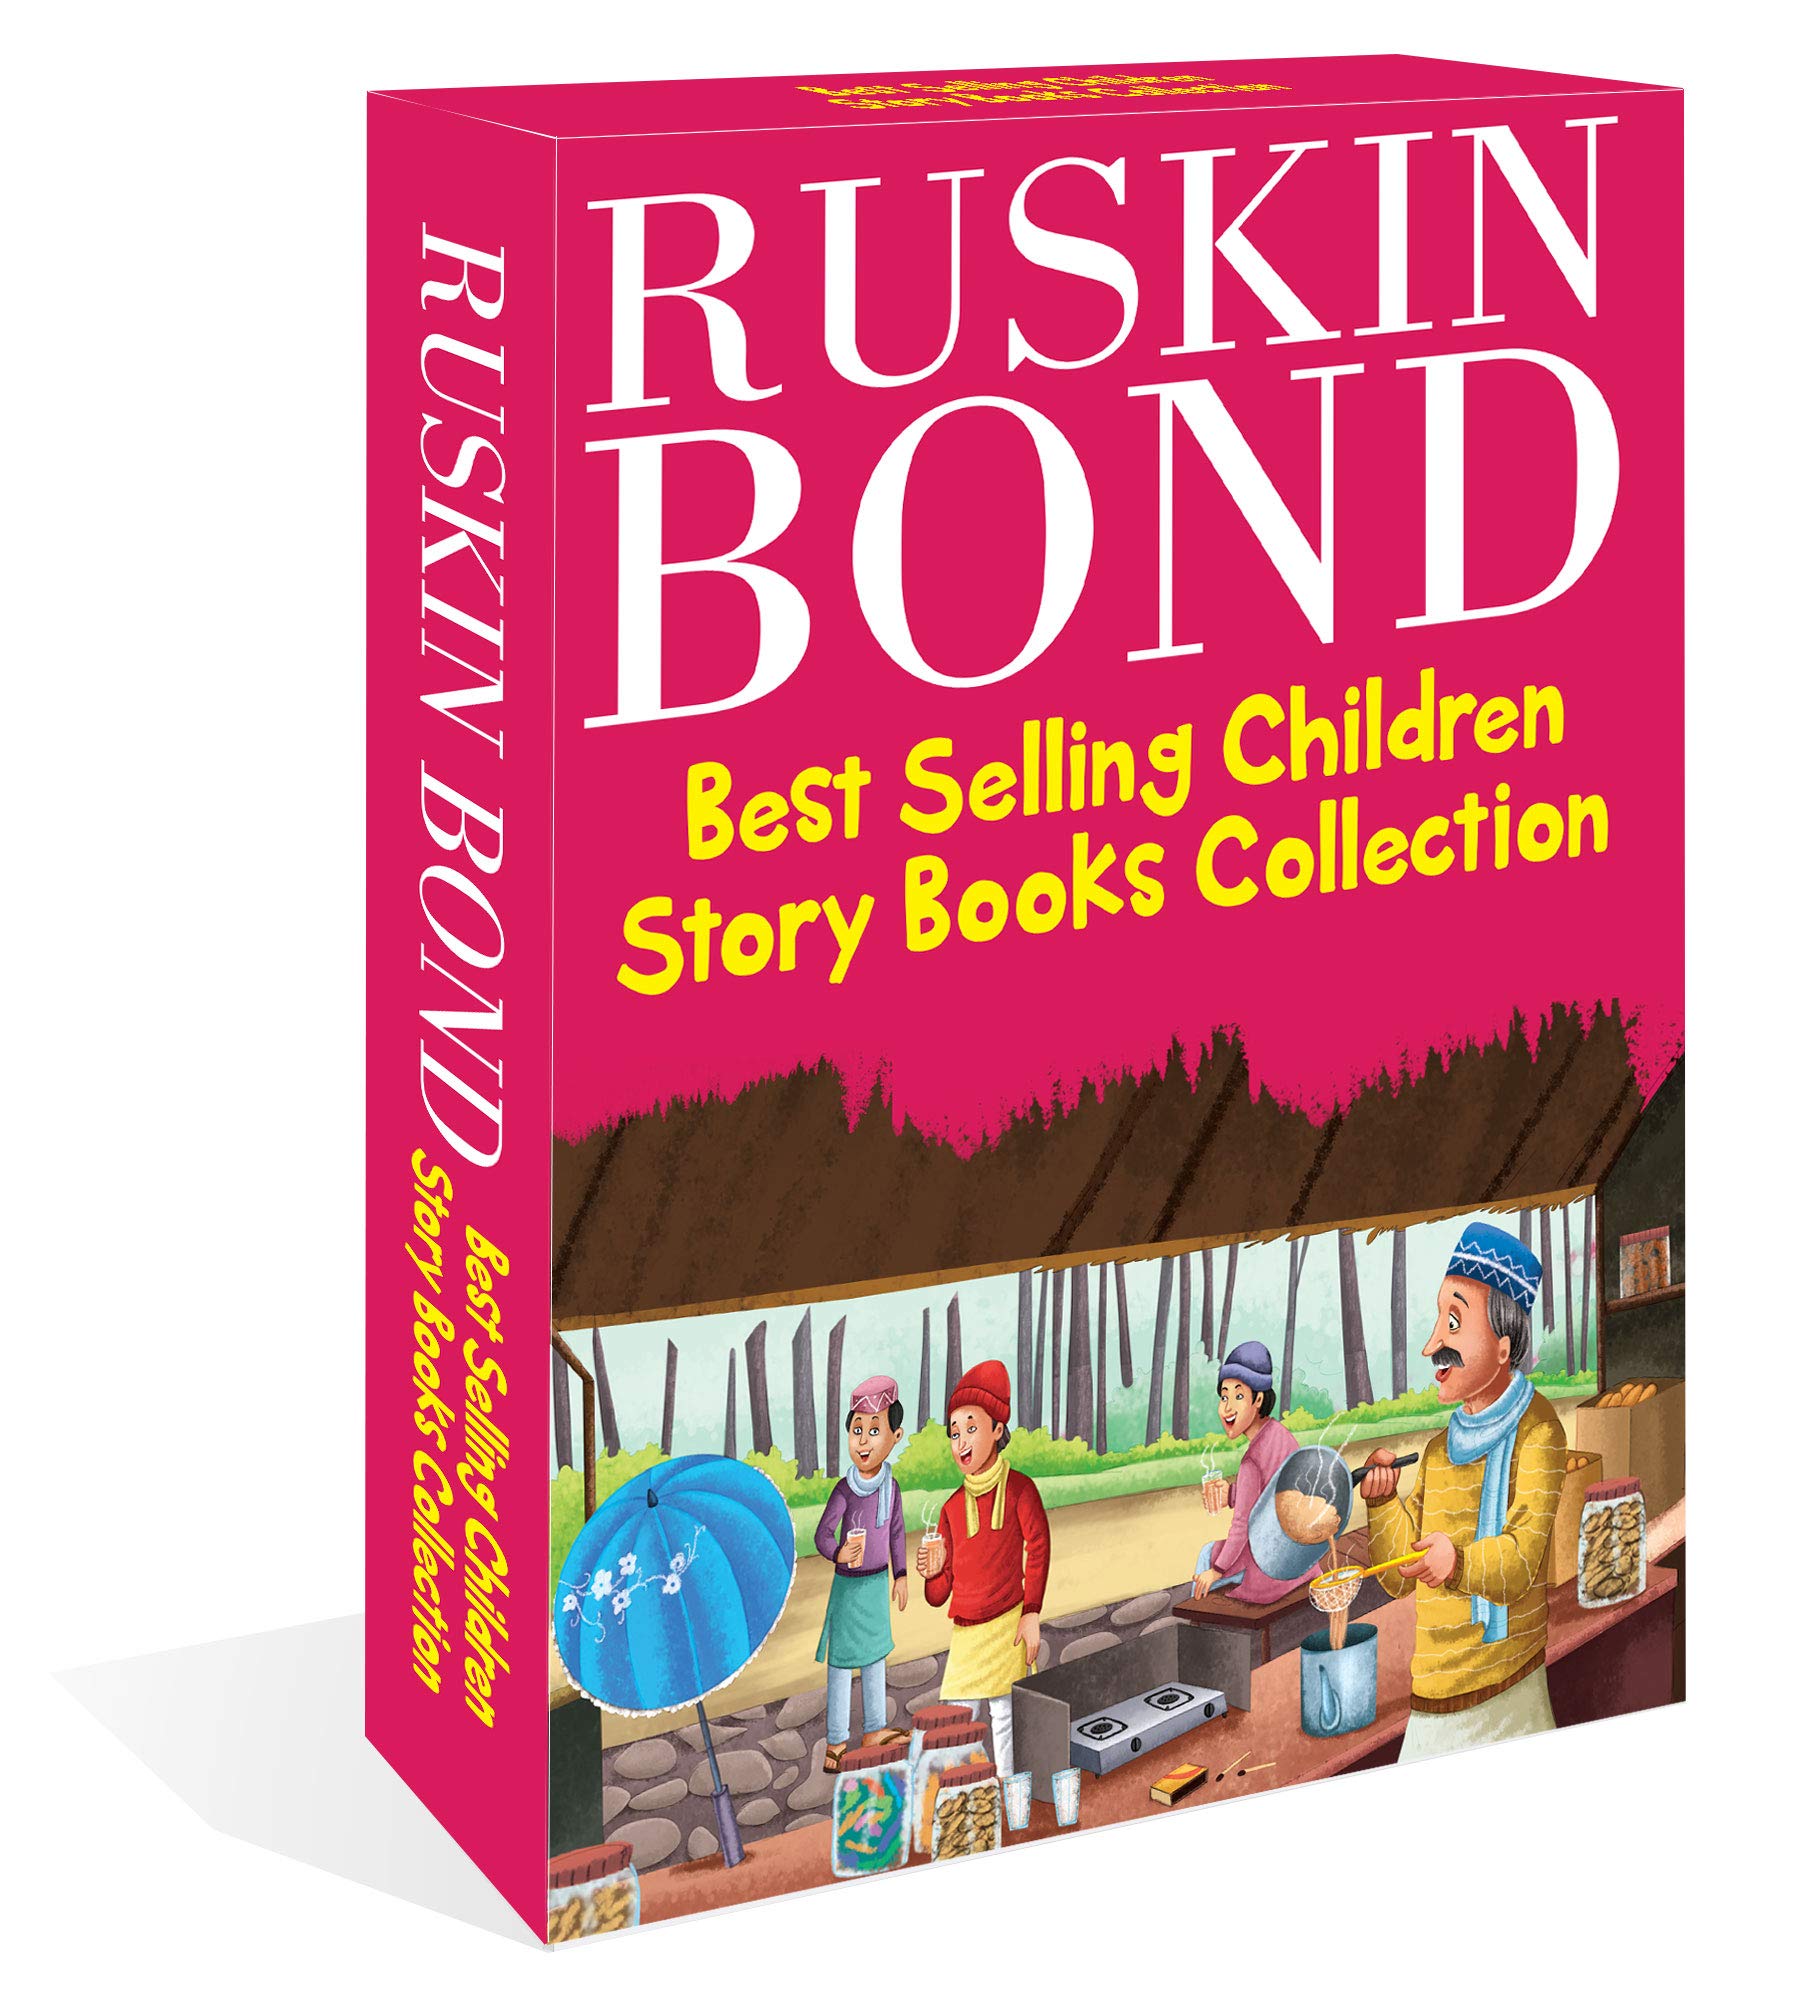 Ruskin Bond - Best Selling Children Story Books Collection